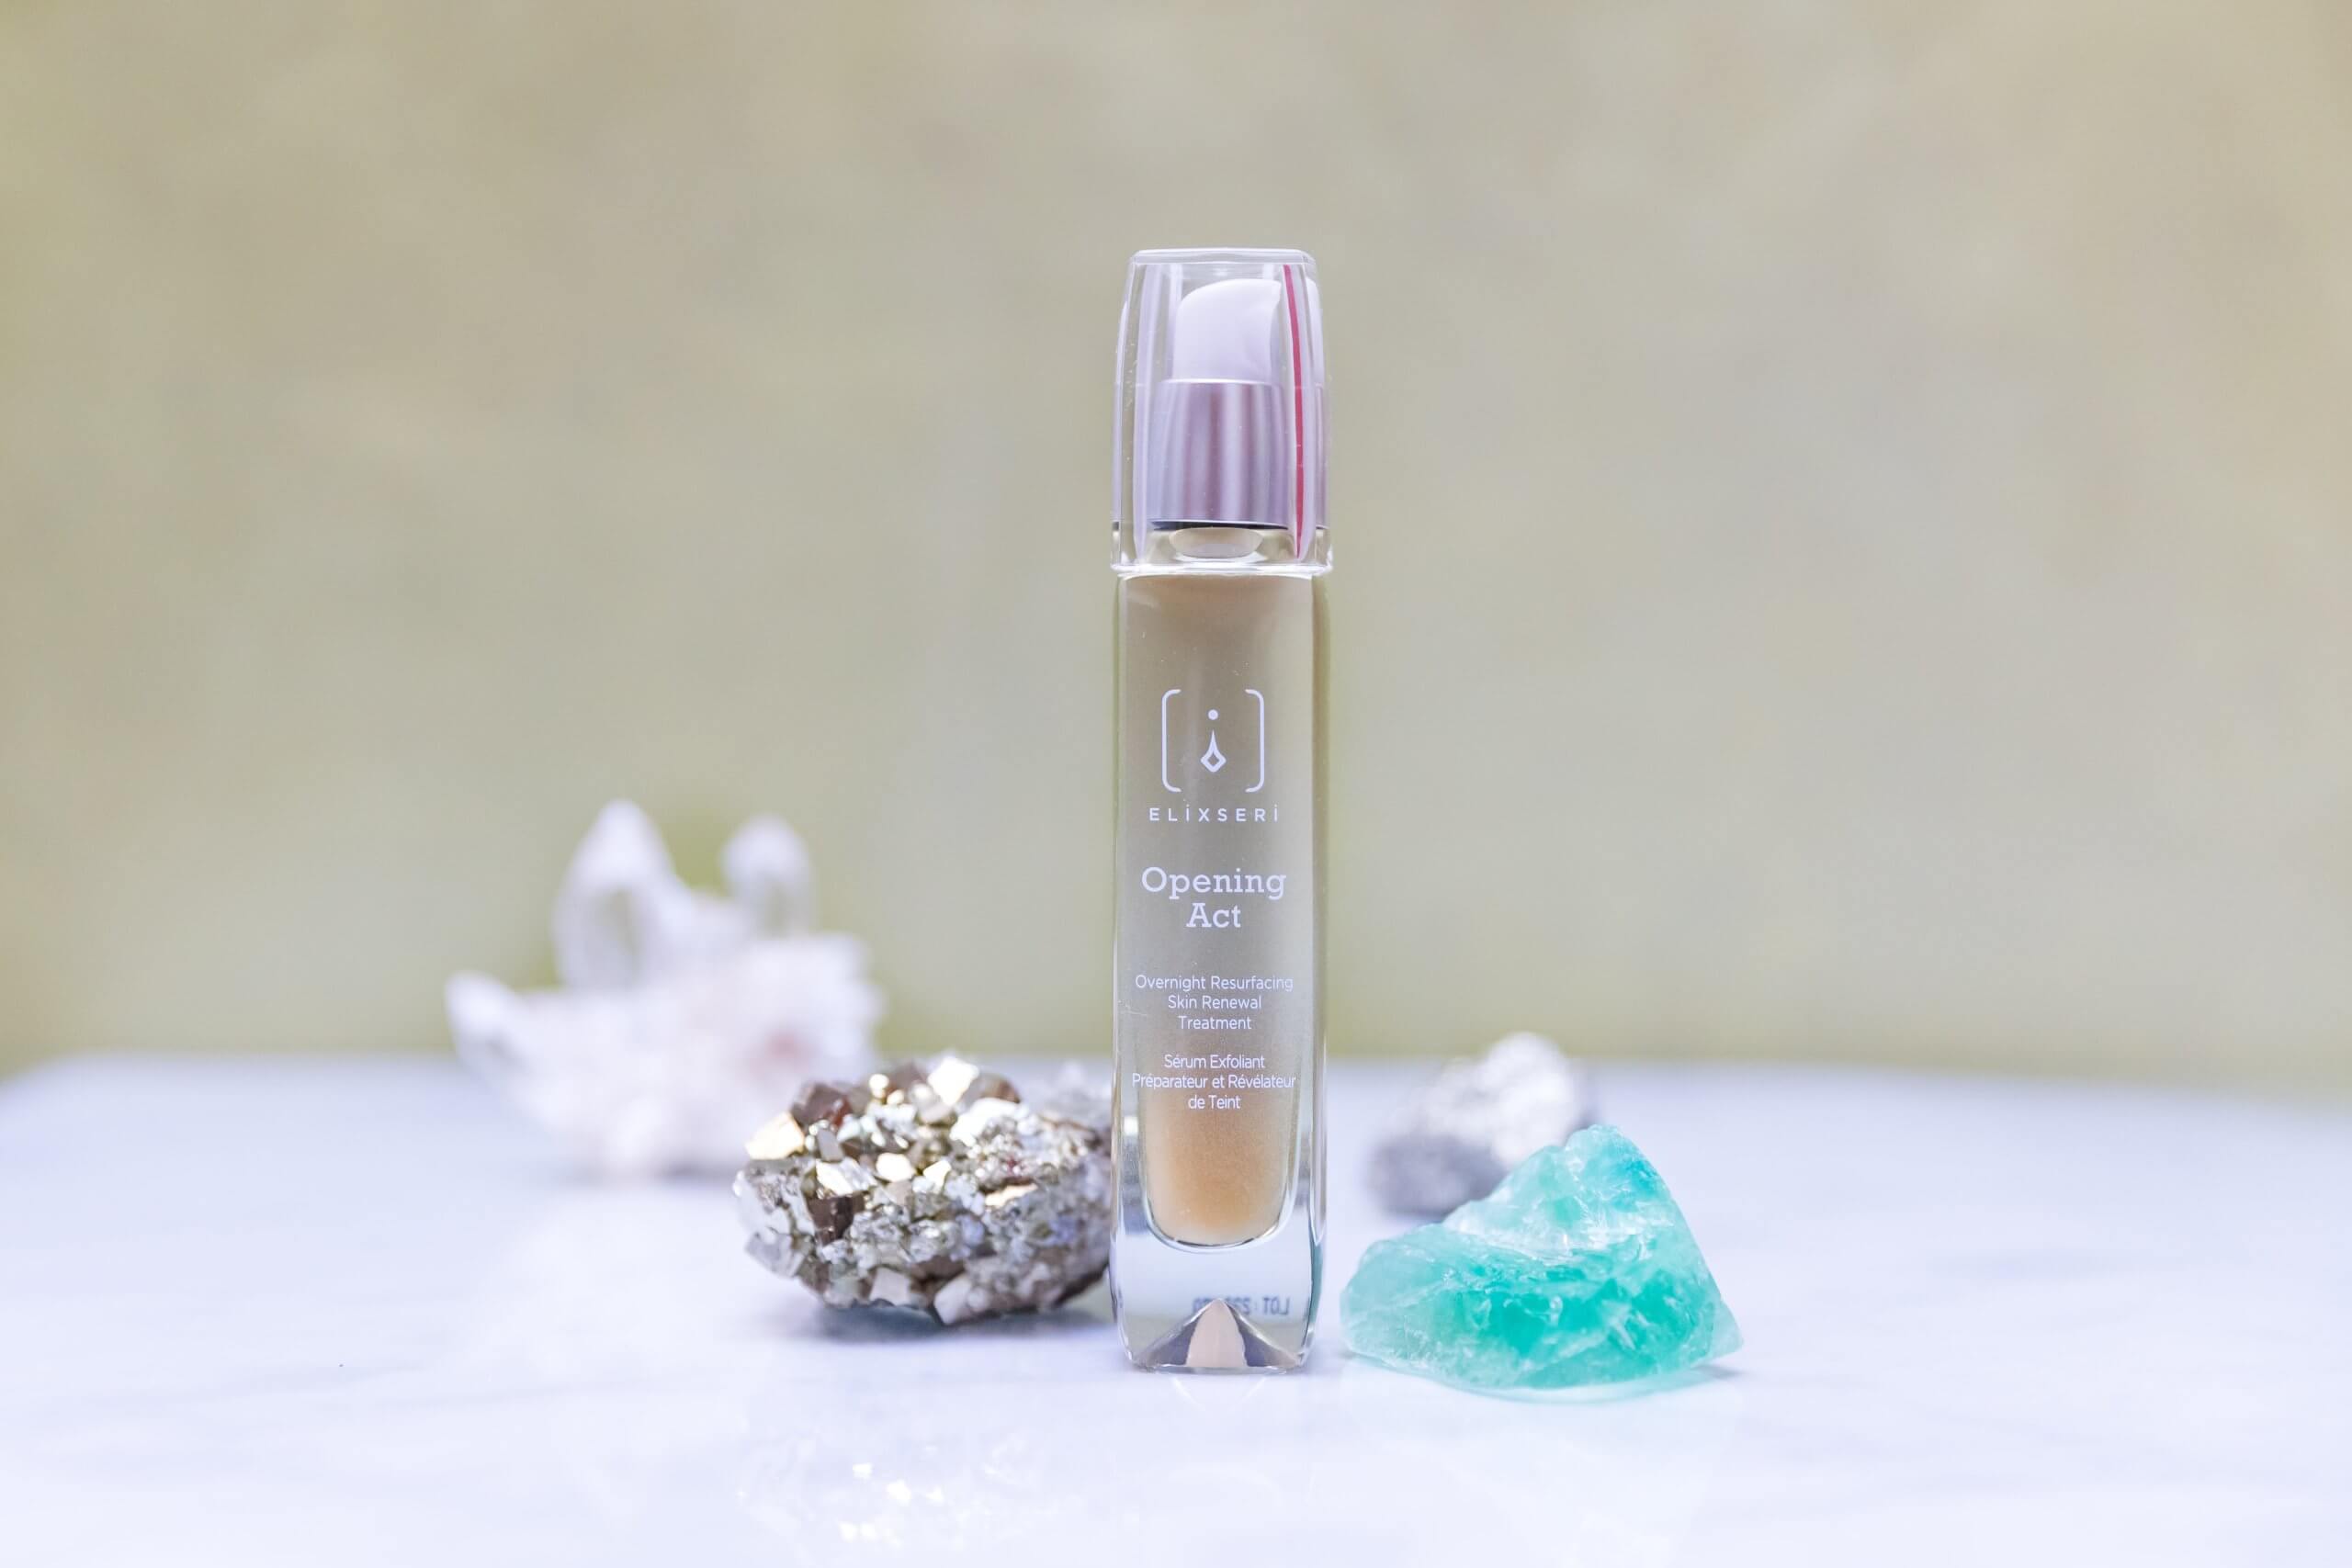 A green bottle of Elixseri Opening Act serum standing on a sandy green background set amongst a collection of crystals